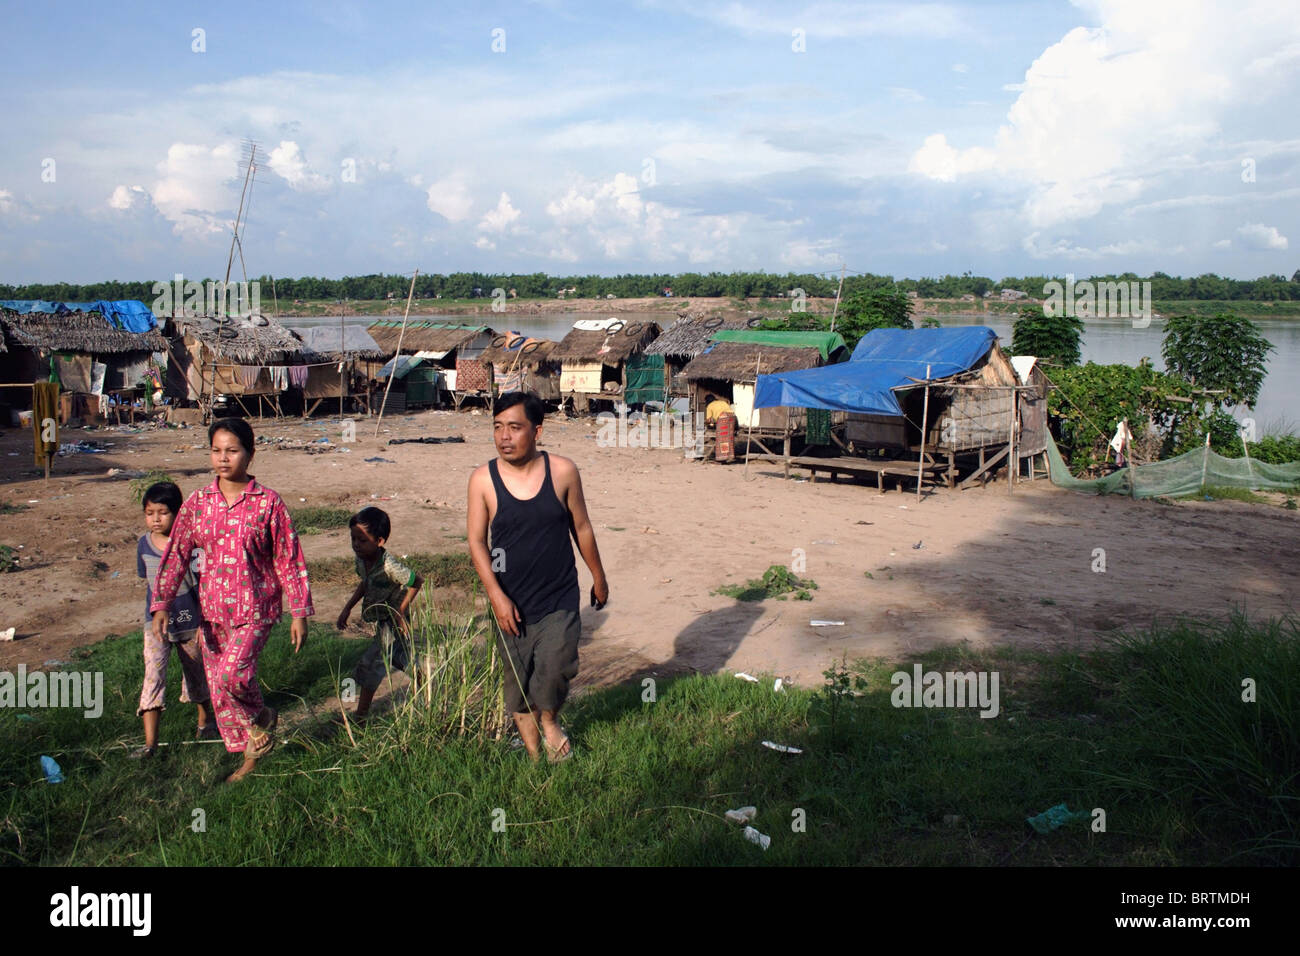 A family is leaving a squatter's slum where people are living in poverty on the bank of a Mekong River in Kampong Cham Cambodia. Stock Photo